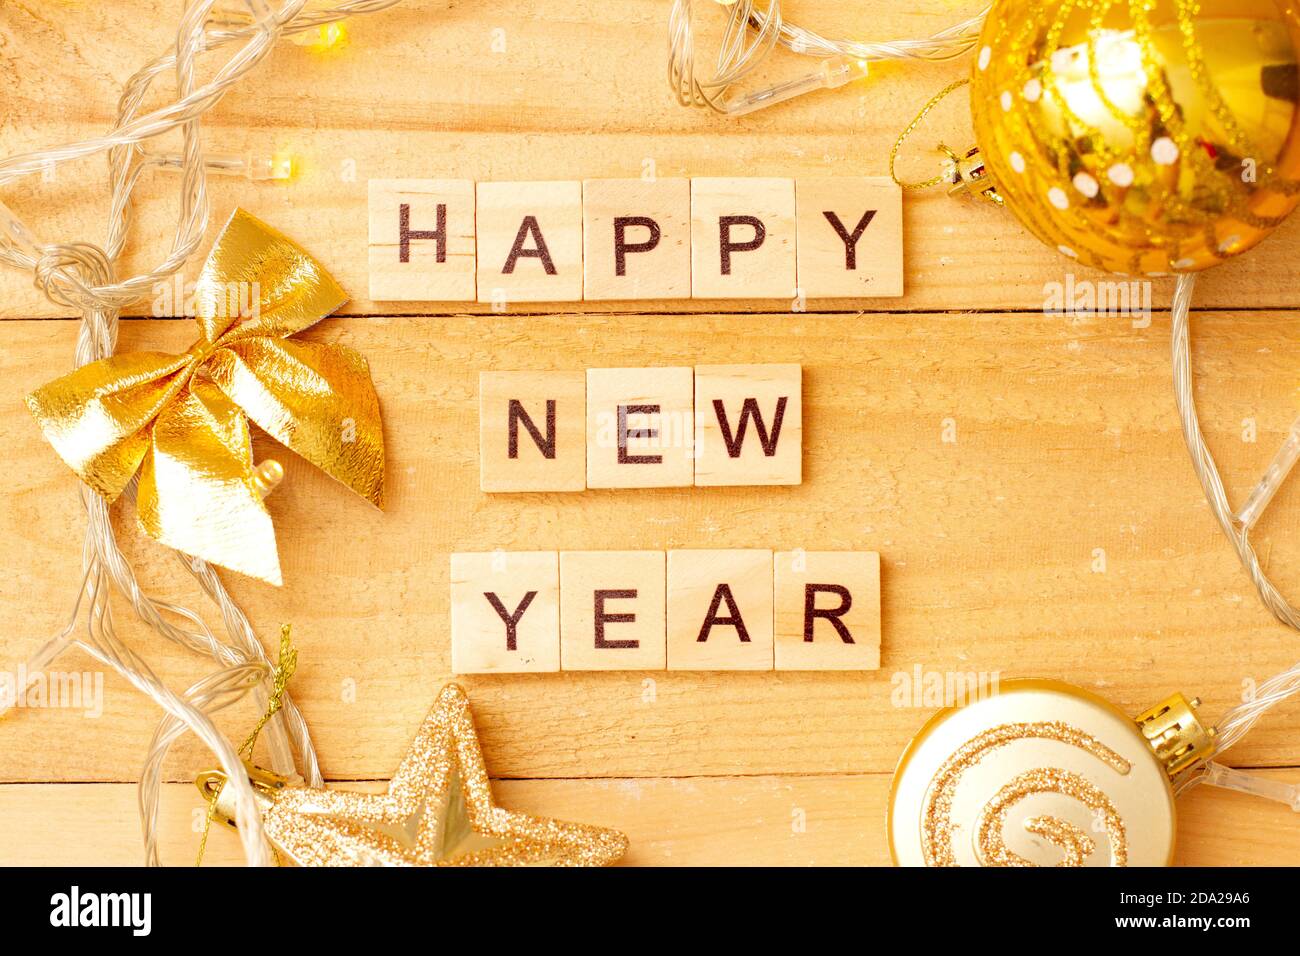 HAPPY NEW YEAR made from wooden cubes with decoration for Chistmas Stock Photo